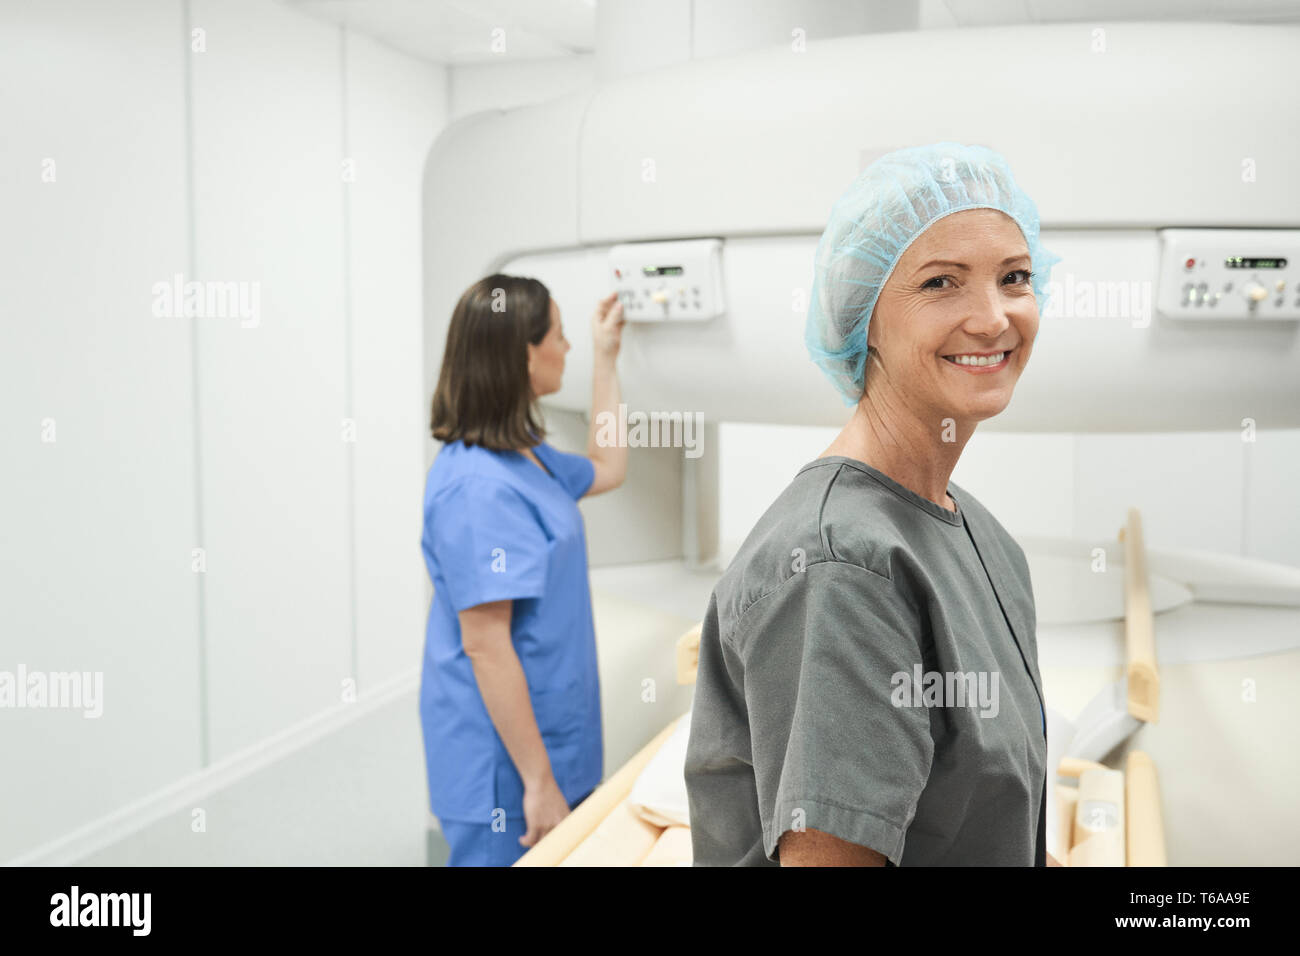 Portrait Of Happy Mature Woman Smiling As Patient In Clinic Stock Photo